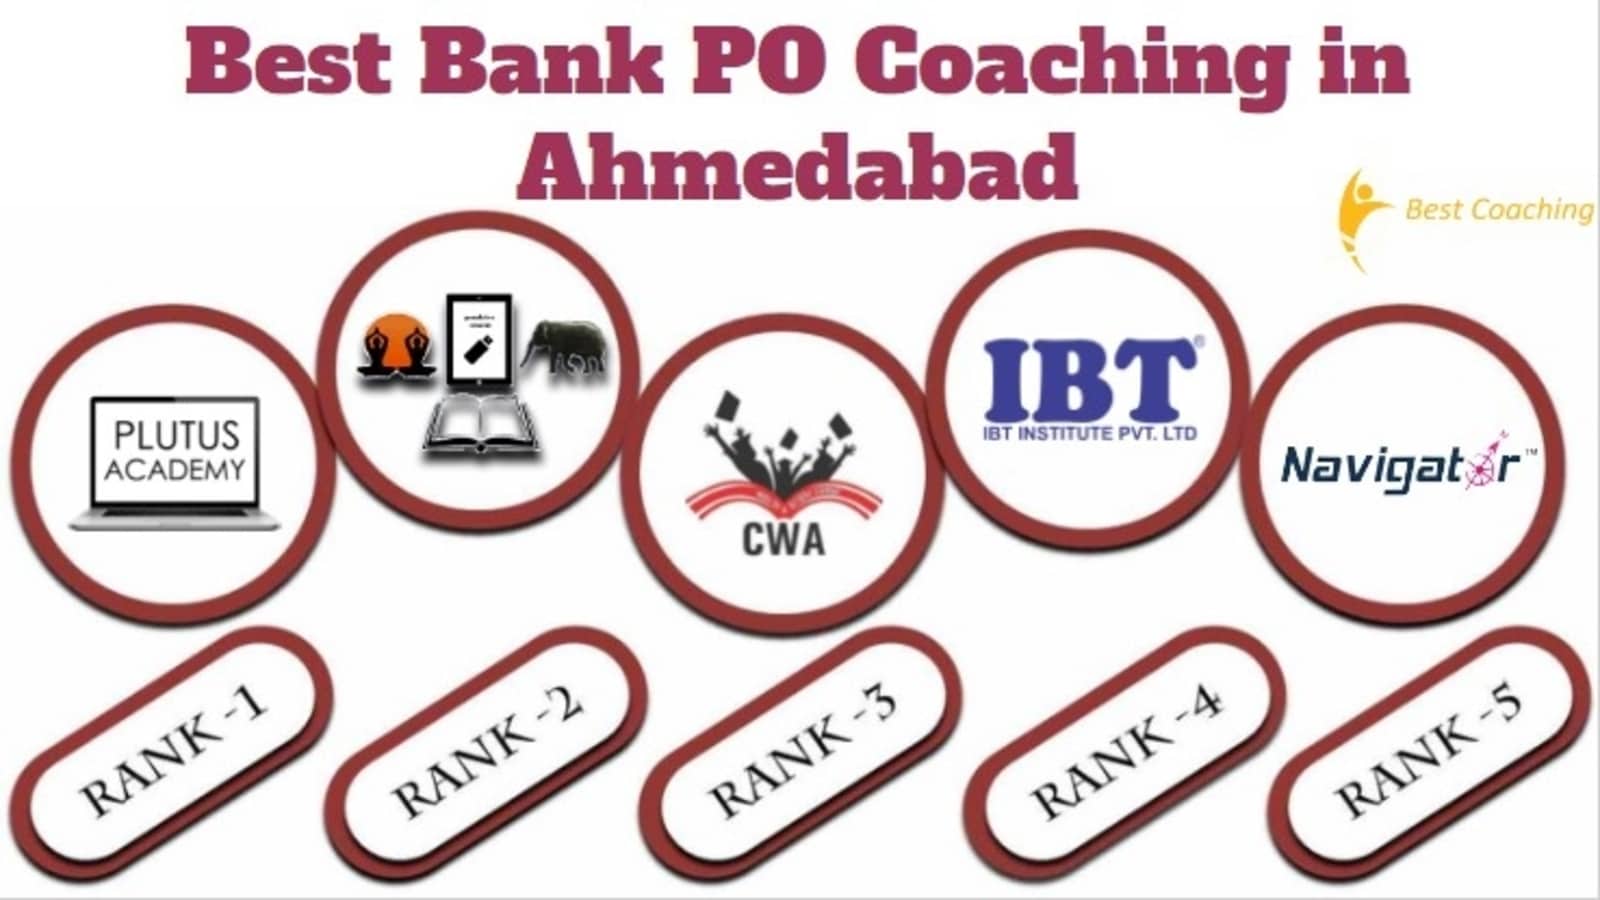 Best Bank PO Coaching in Ahmedabad